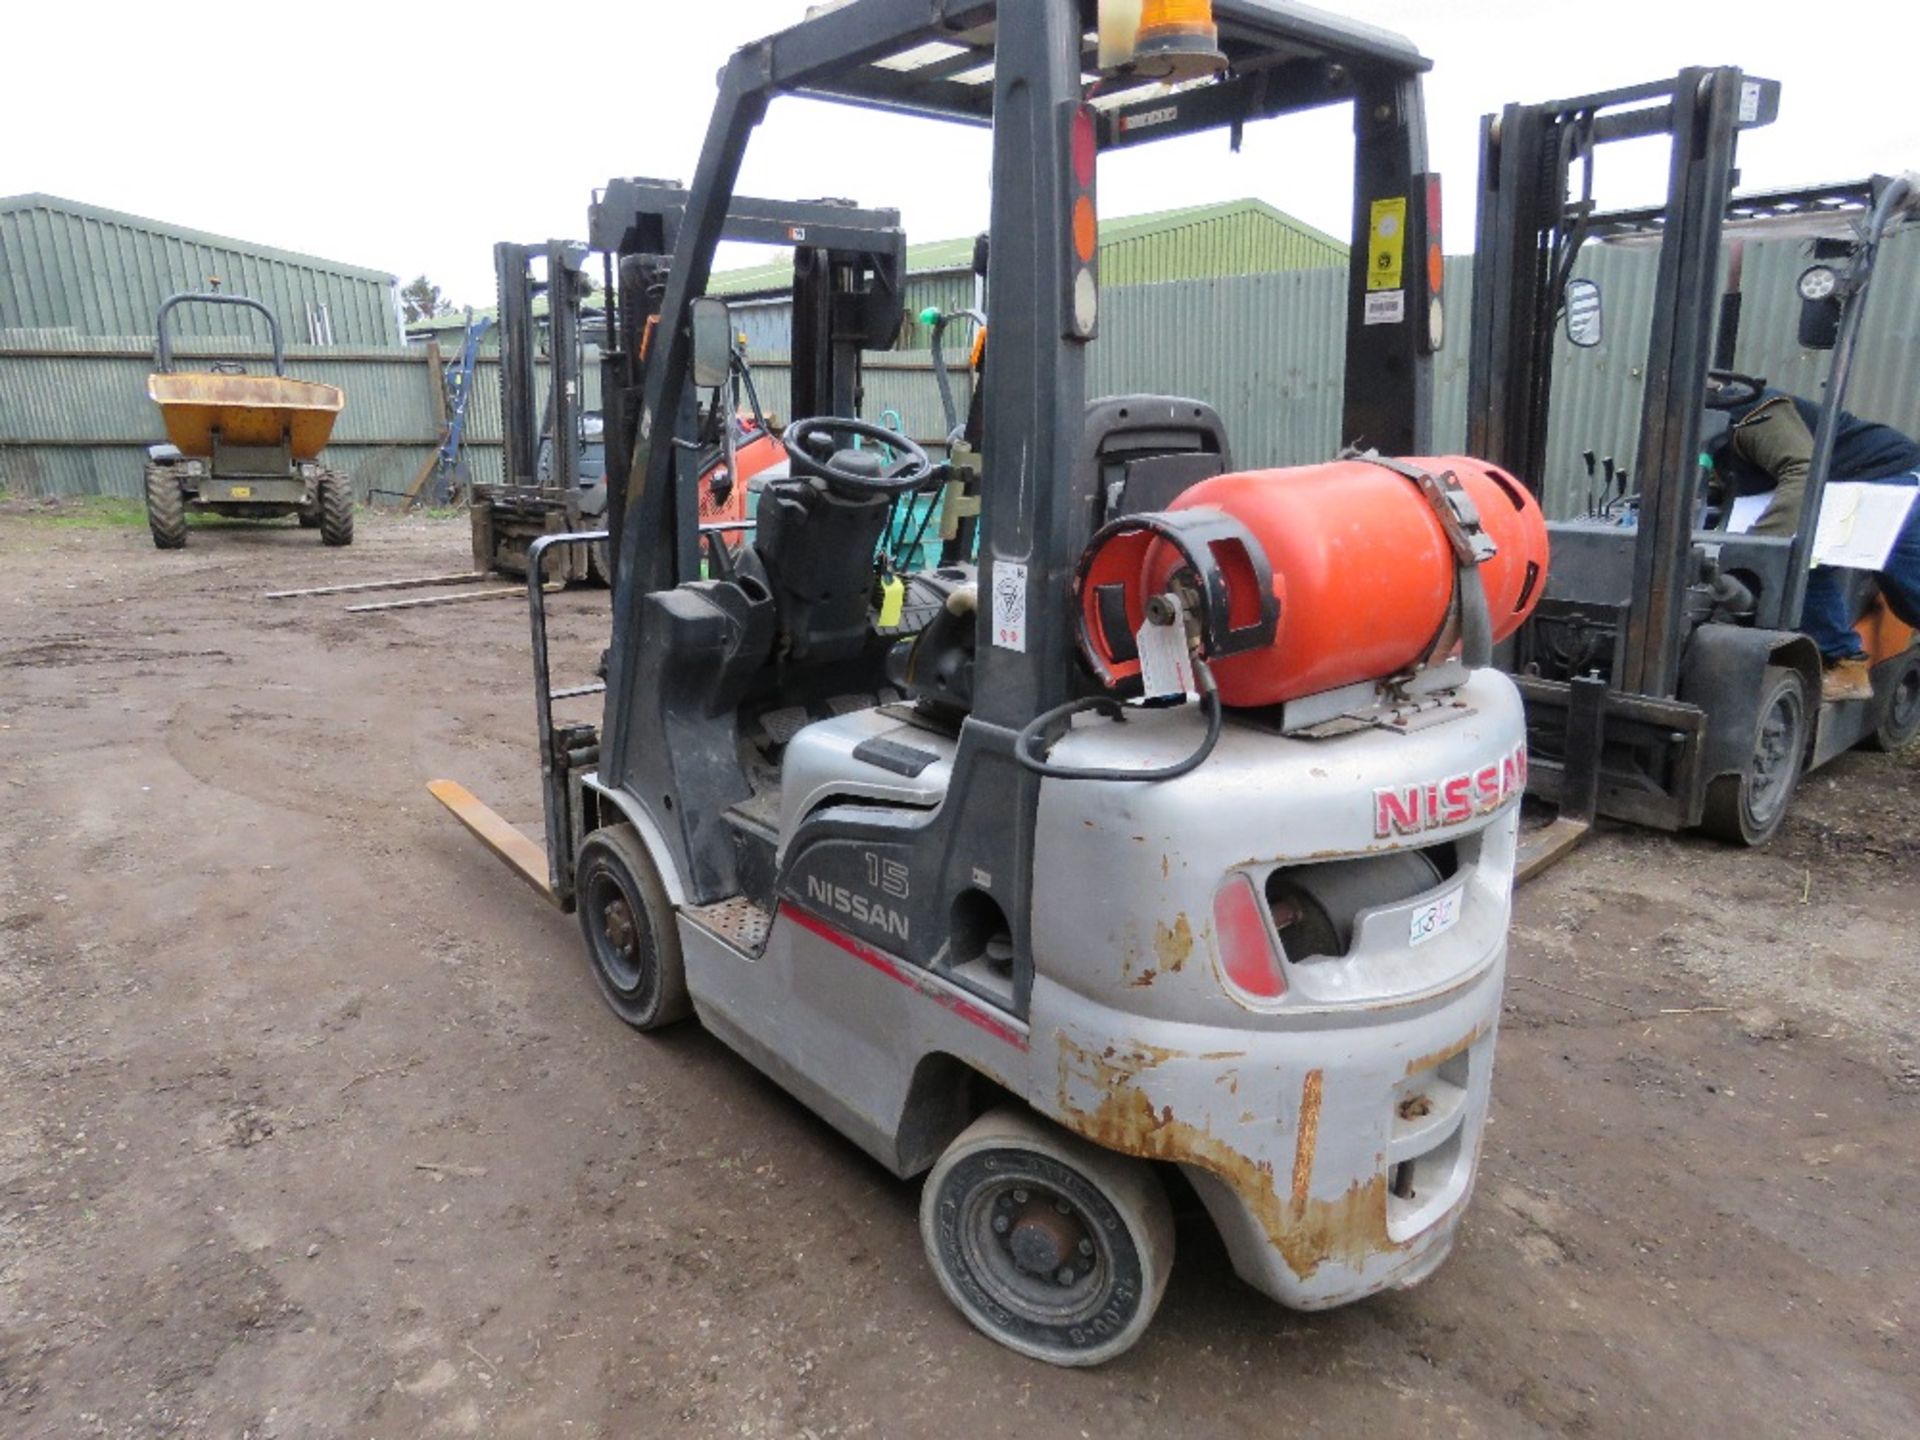 NISSAN 1.5TONNE CAPACITY GAS POWERED FORKLIFT TRUCK SN:L01-000622, 3260 REC HOURS. LOW MAST HEIGHT. - Image 4 of 10